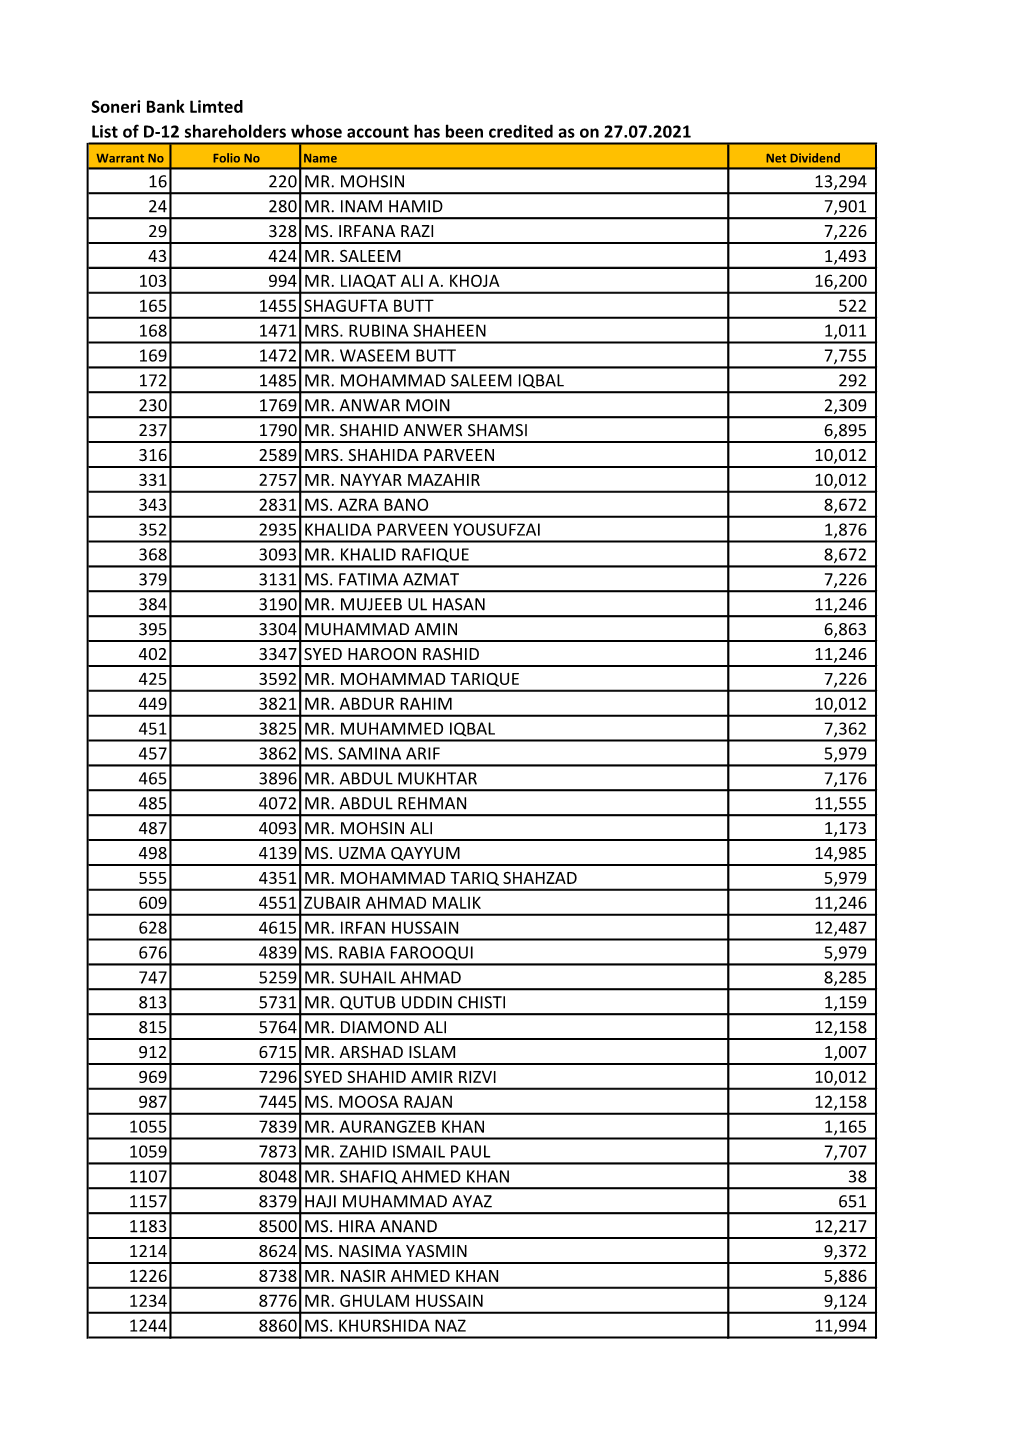 Soneri Bank Limted List of D-12 Shareholders Whose Account Has Been Credited As on 27.07.2021 Warrant No Folio No Name Net Dividend 16 220 MR